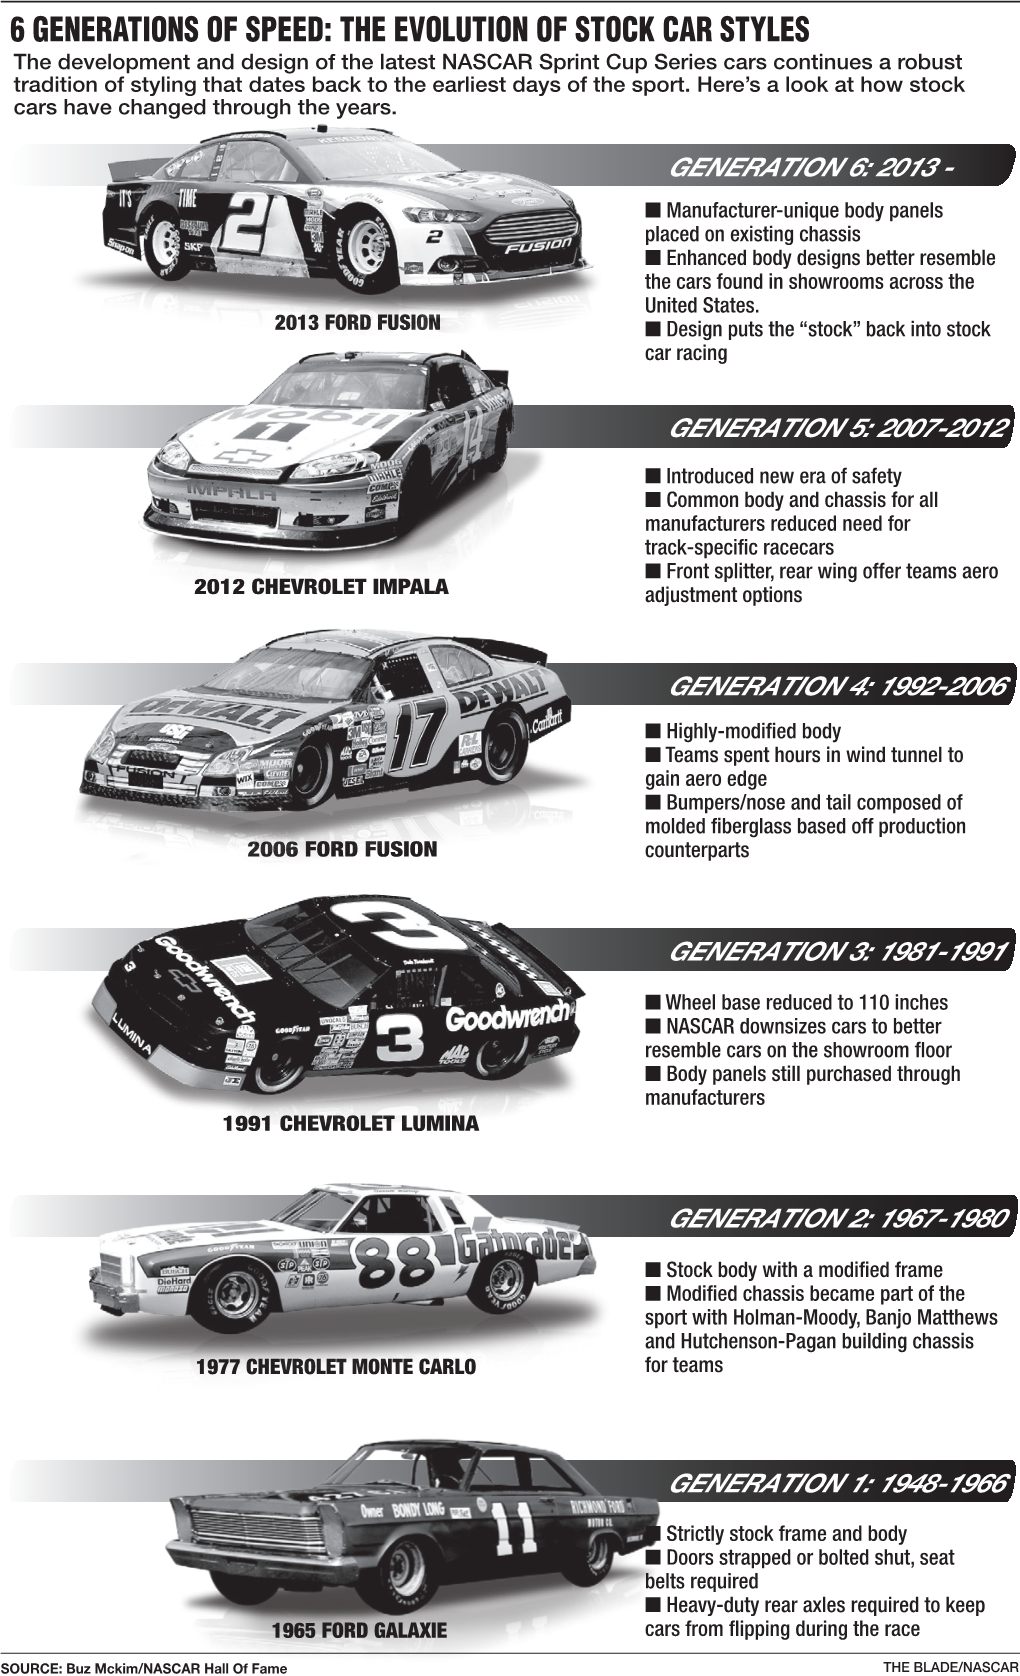 The Evolution of Stock Car Styles